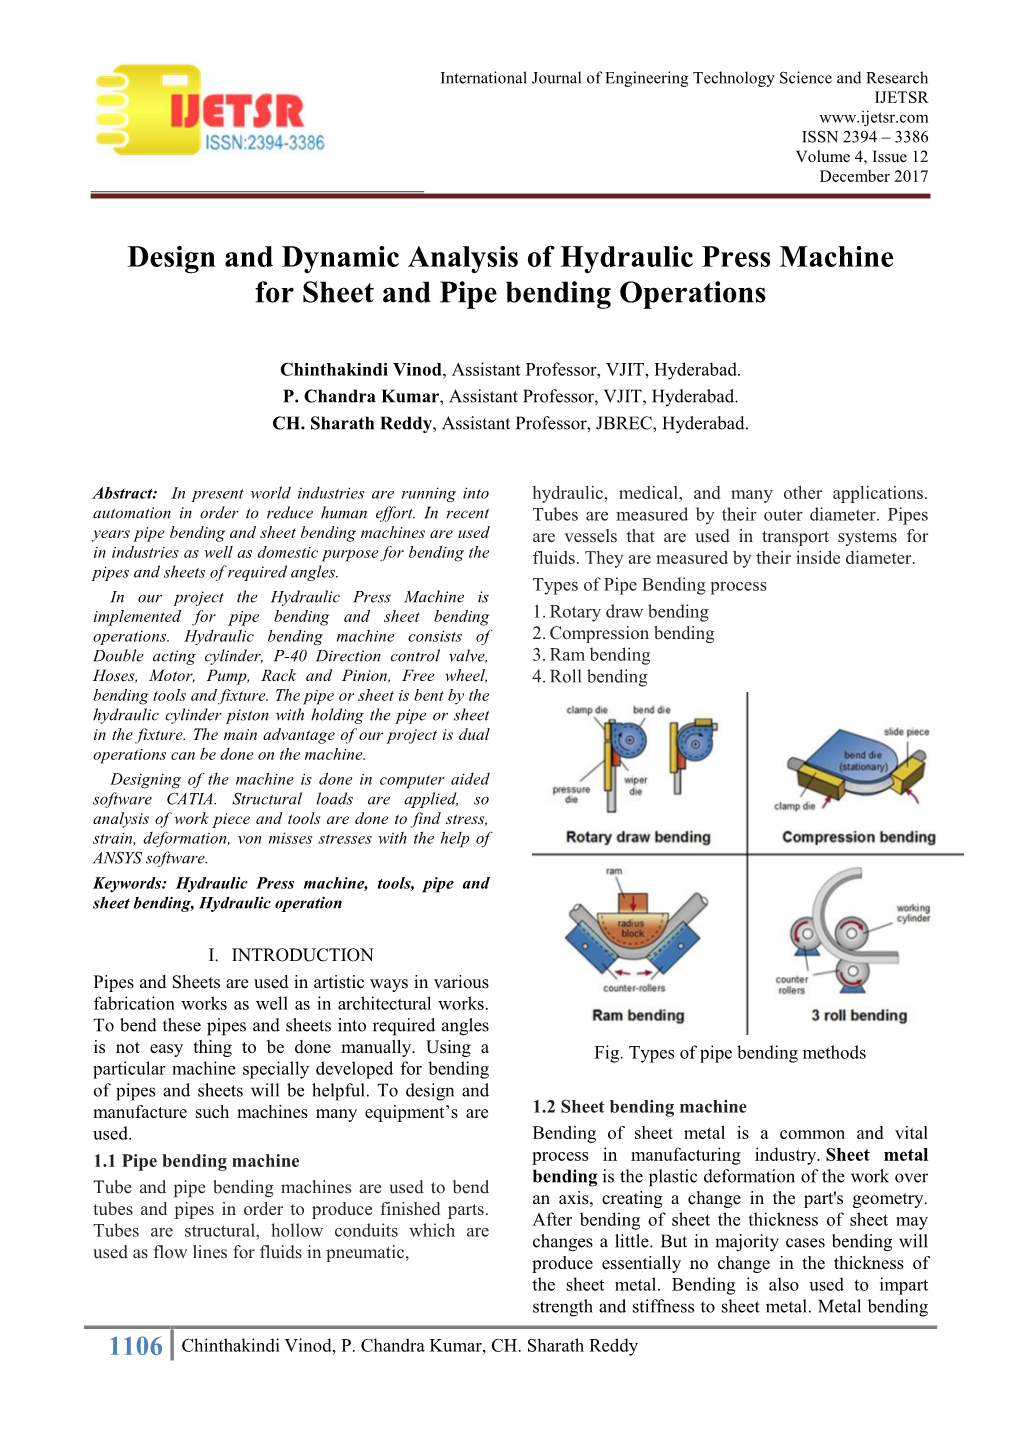 Design and Dynamic Analysis of Hydraulic Press Machine for Sheet and Pipe Bending Operations